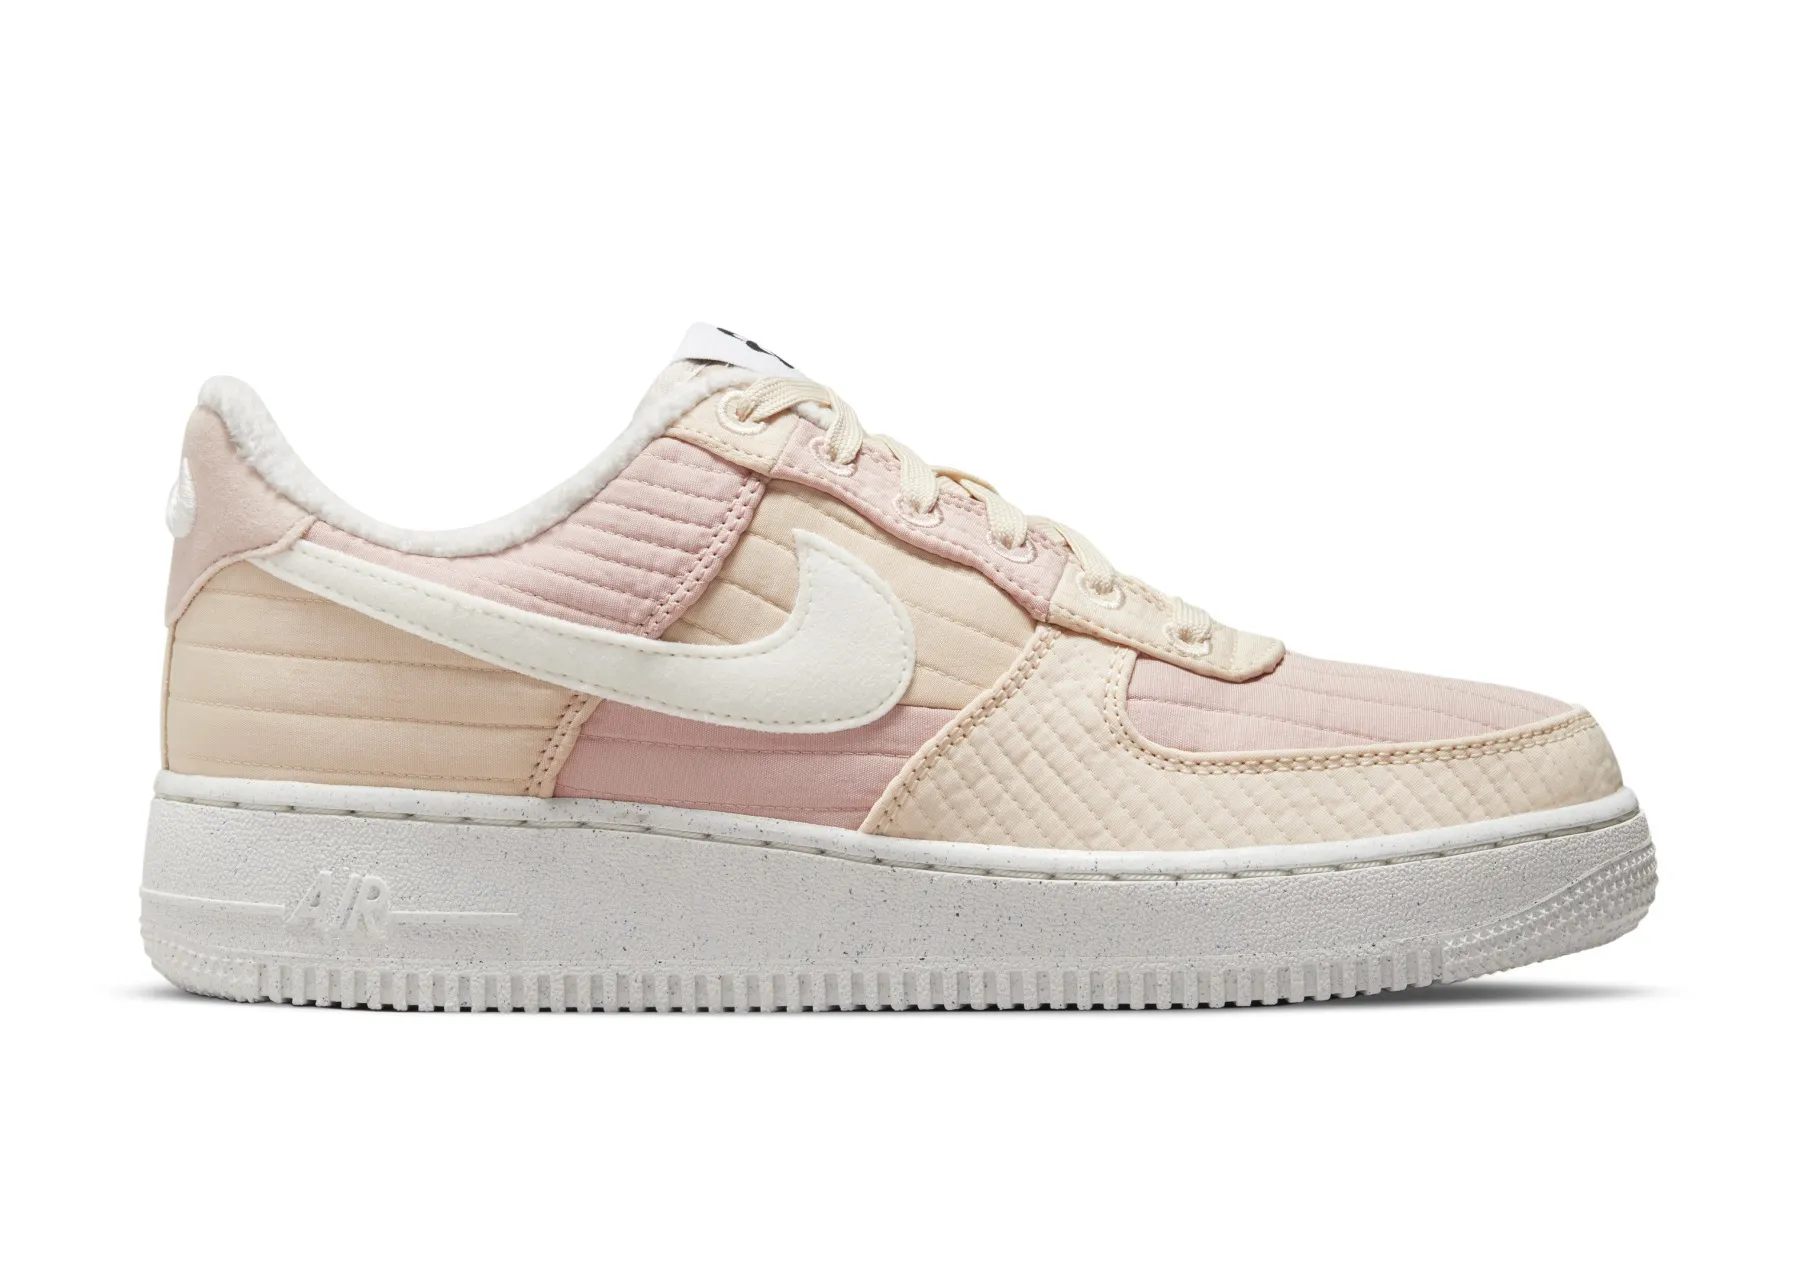 Nike Air Force 1 Low Toasty Pink Oxford 